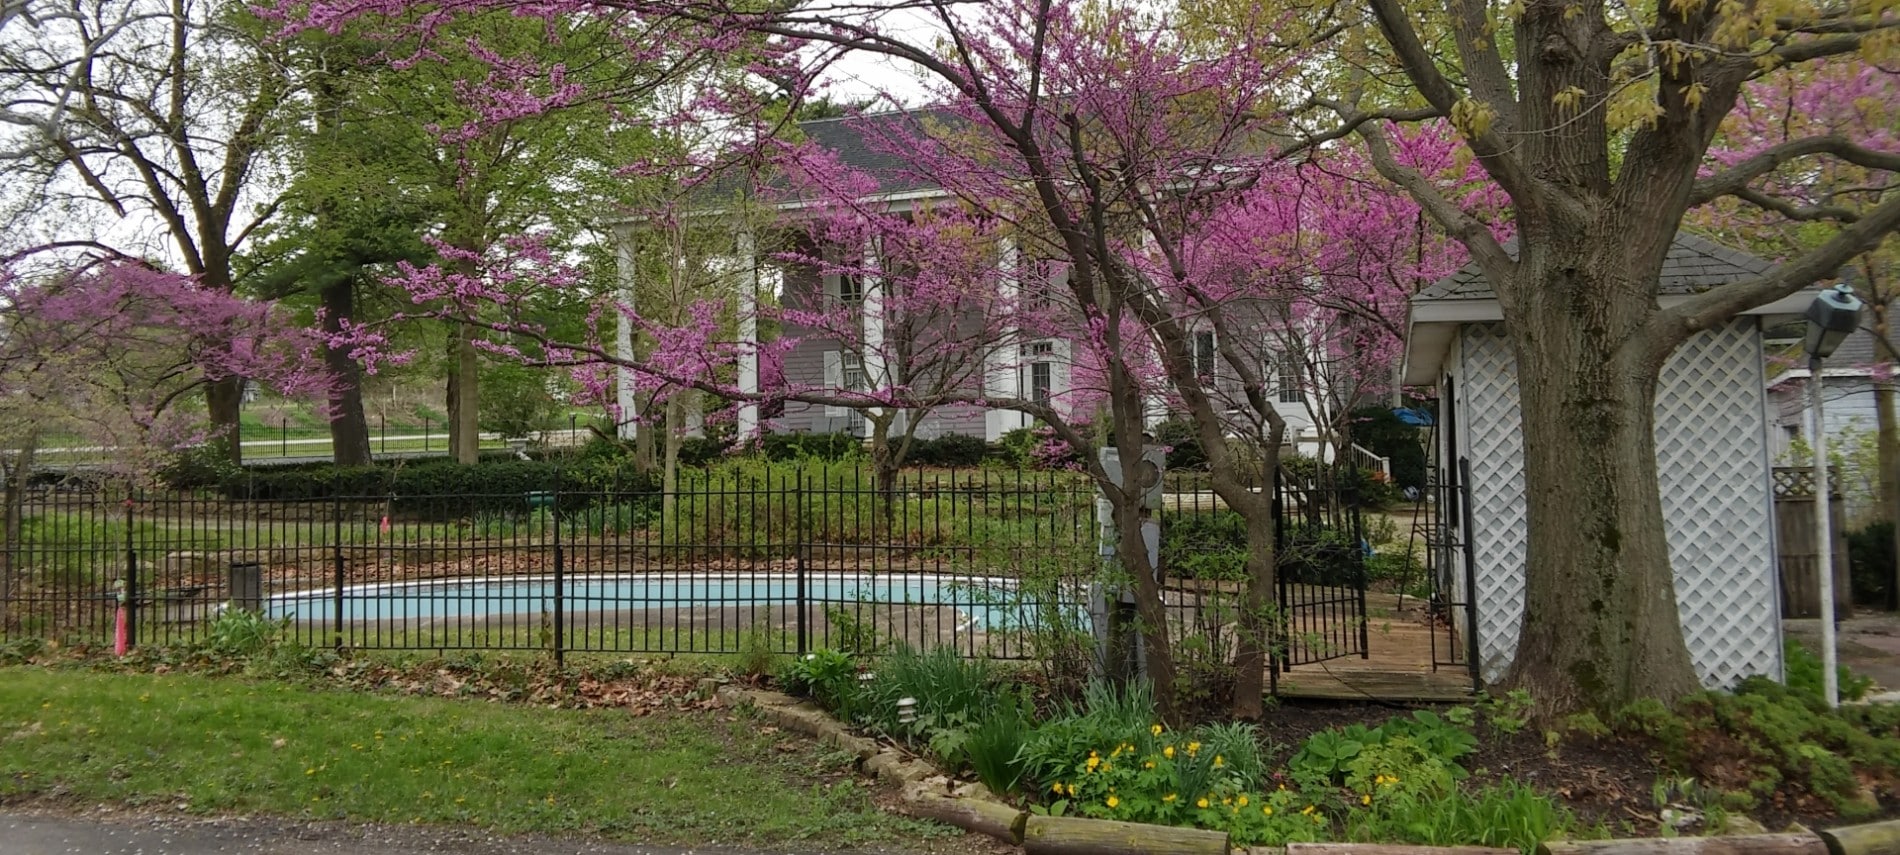 Large white house with columns overlooks a swimming pool enclosed by a black wrough iron gate, fronted with blooming trees. 